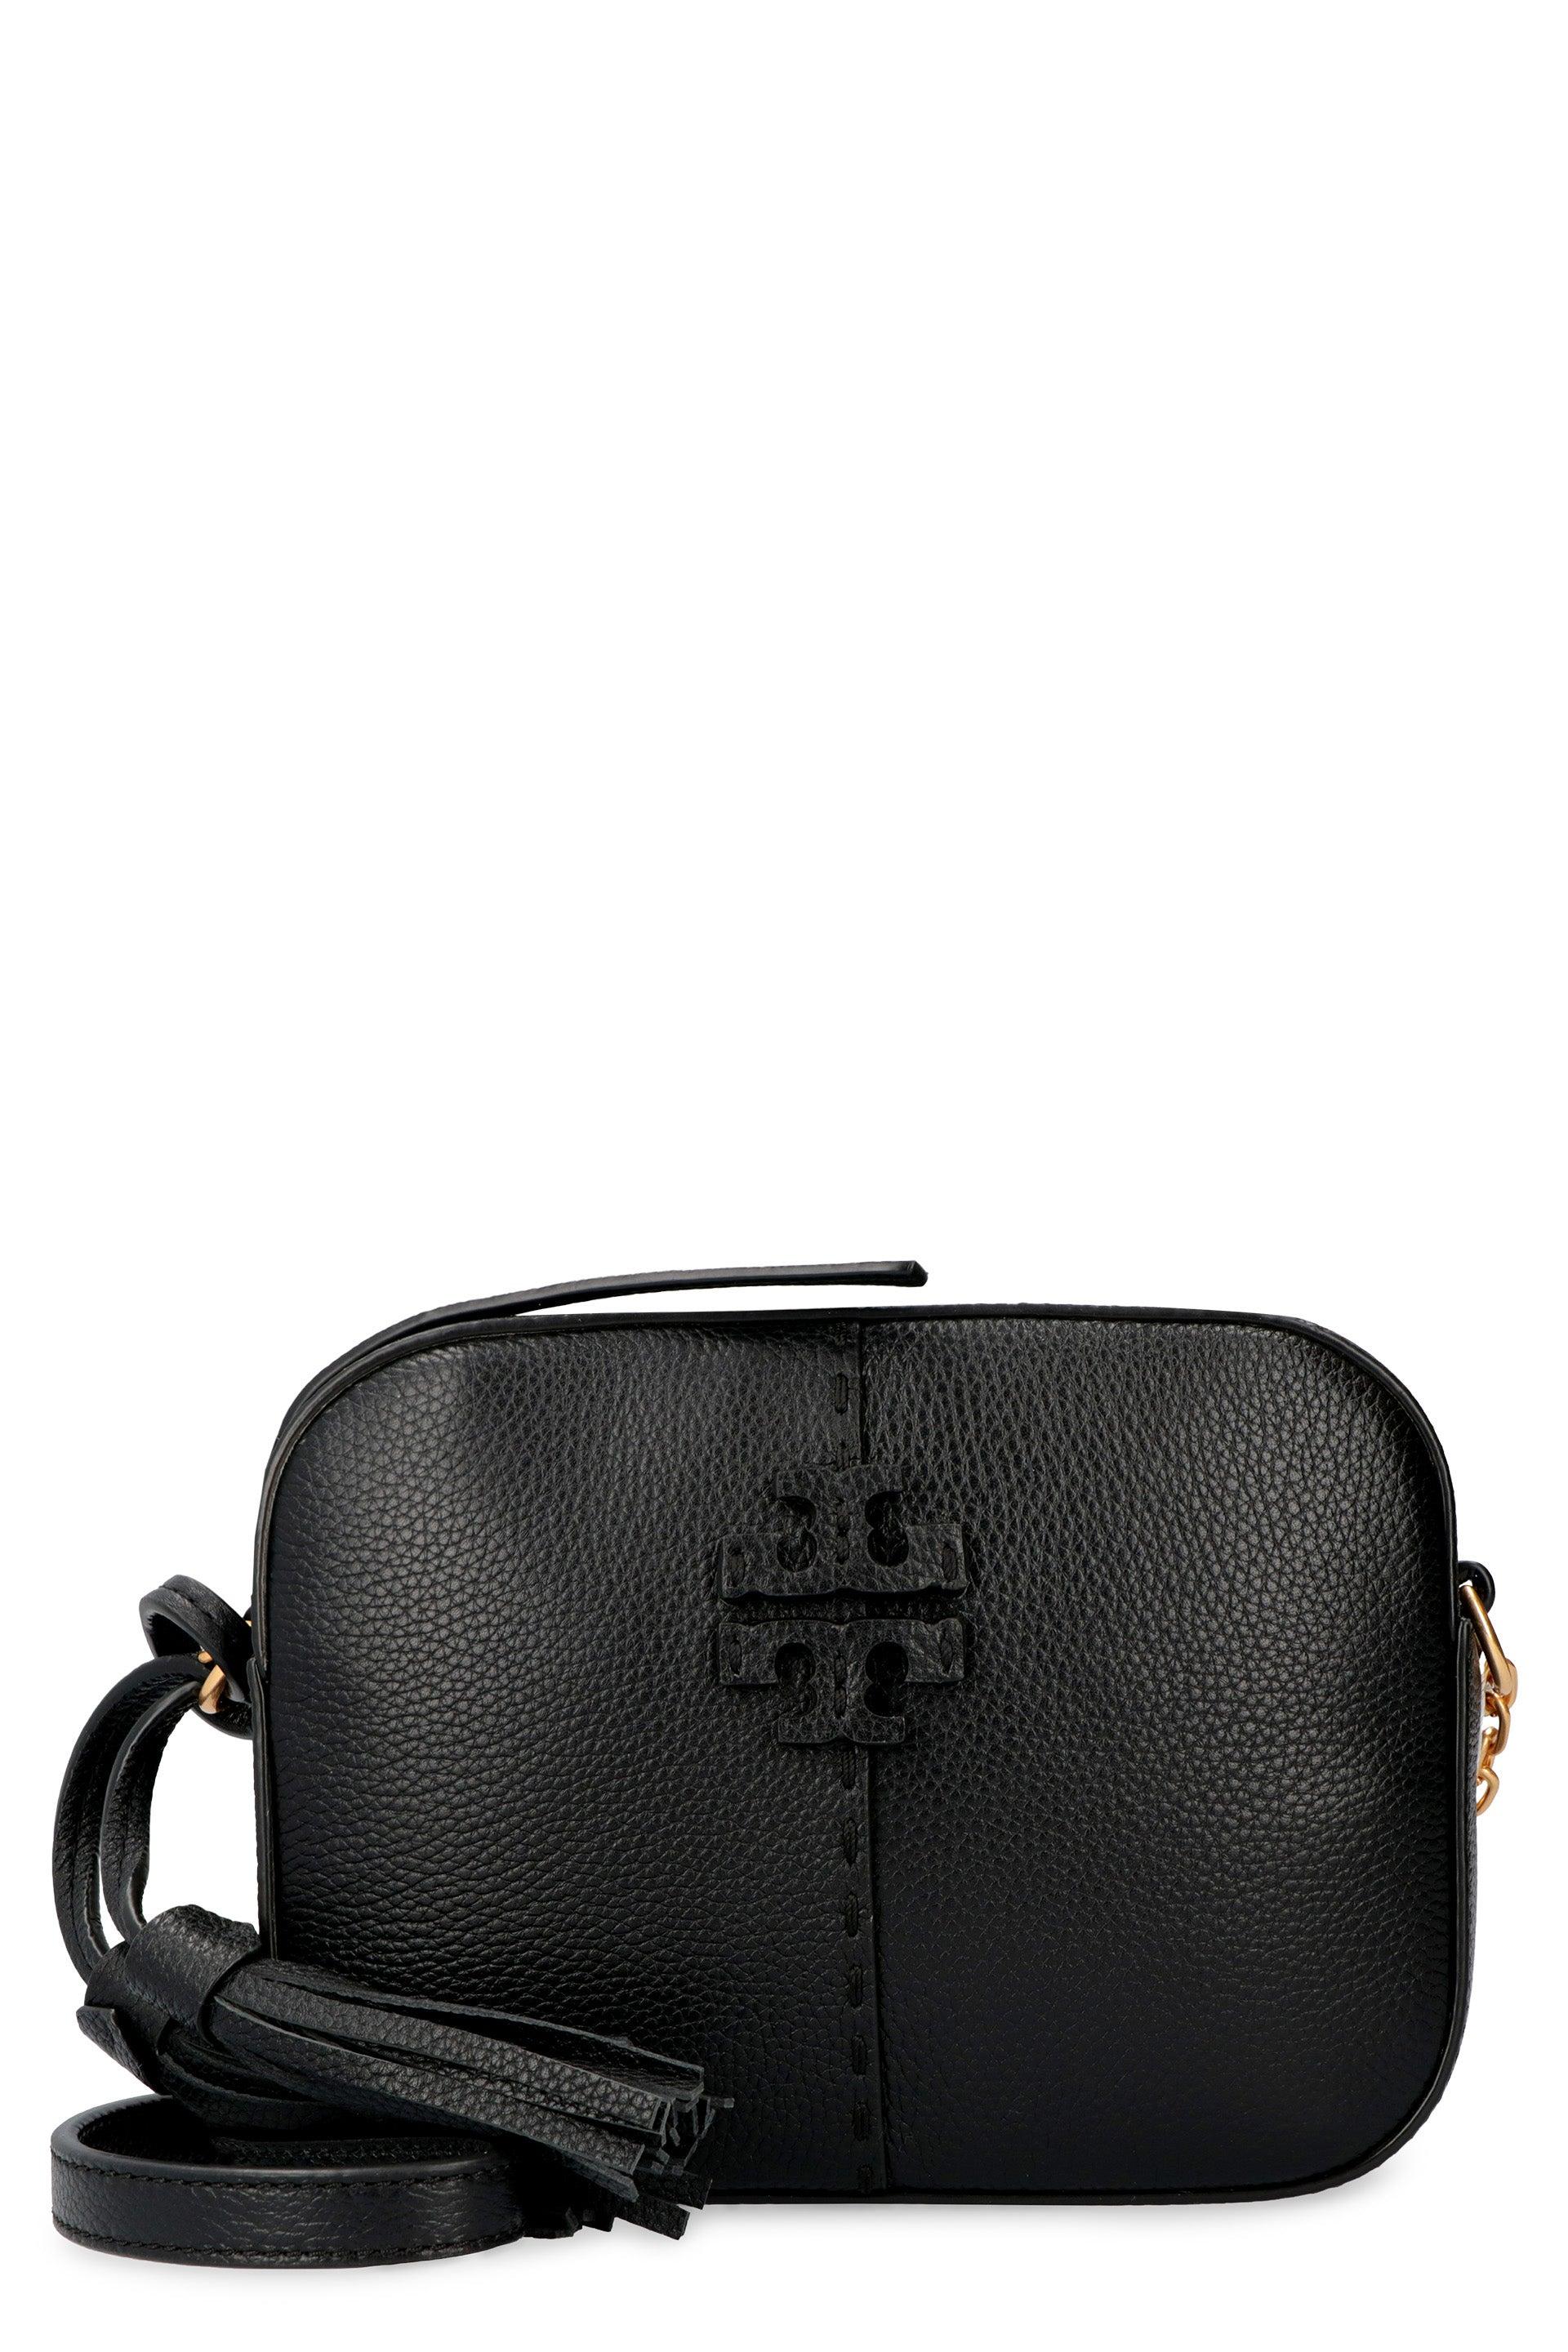 Tory Burch Mcgraw Leather Camera Bag in Black | Lyst